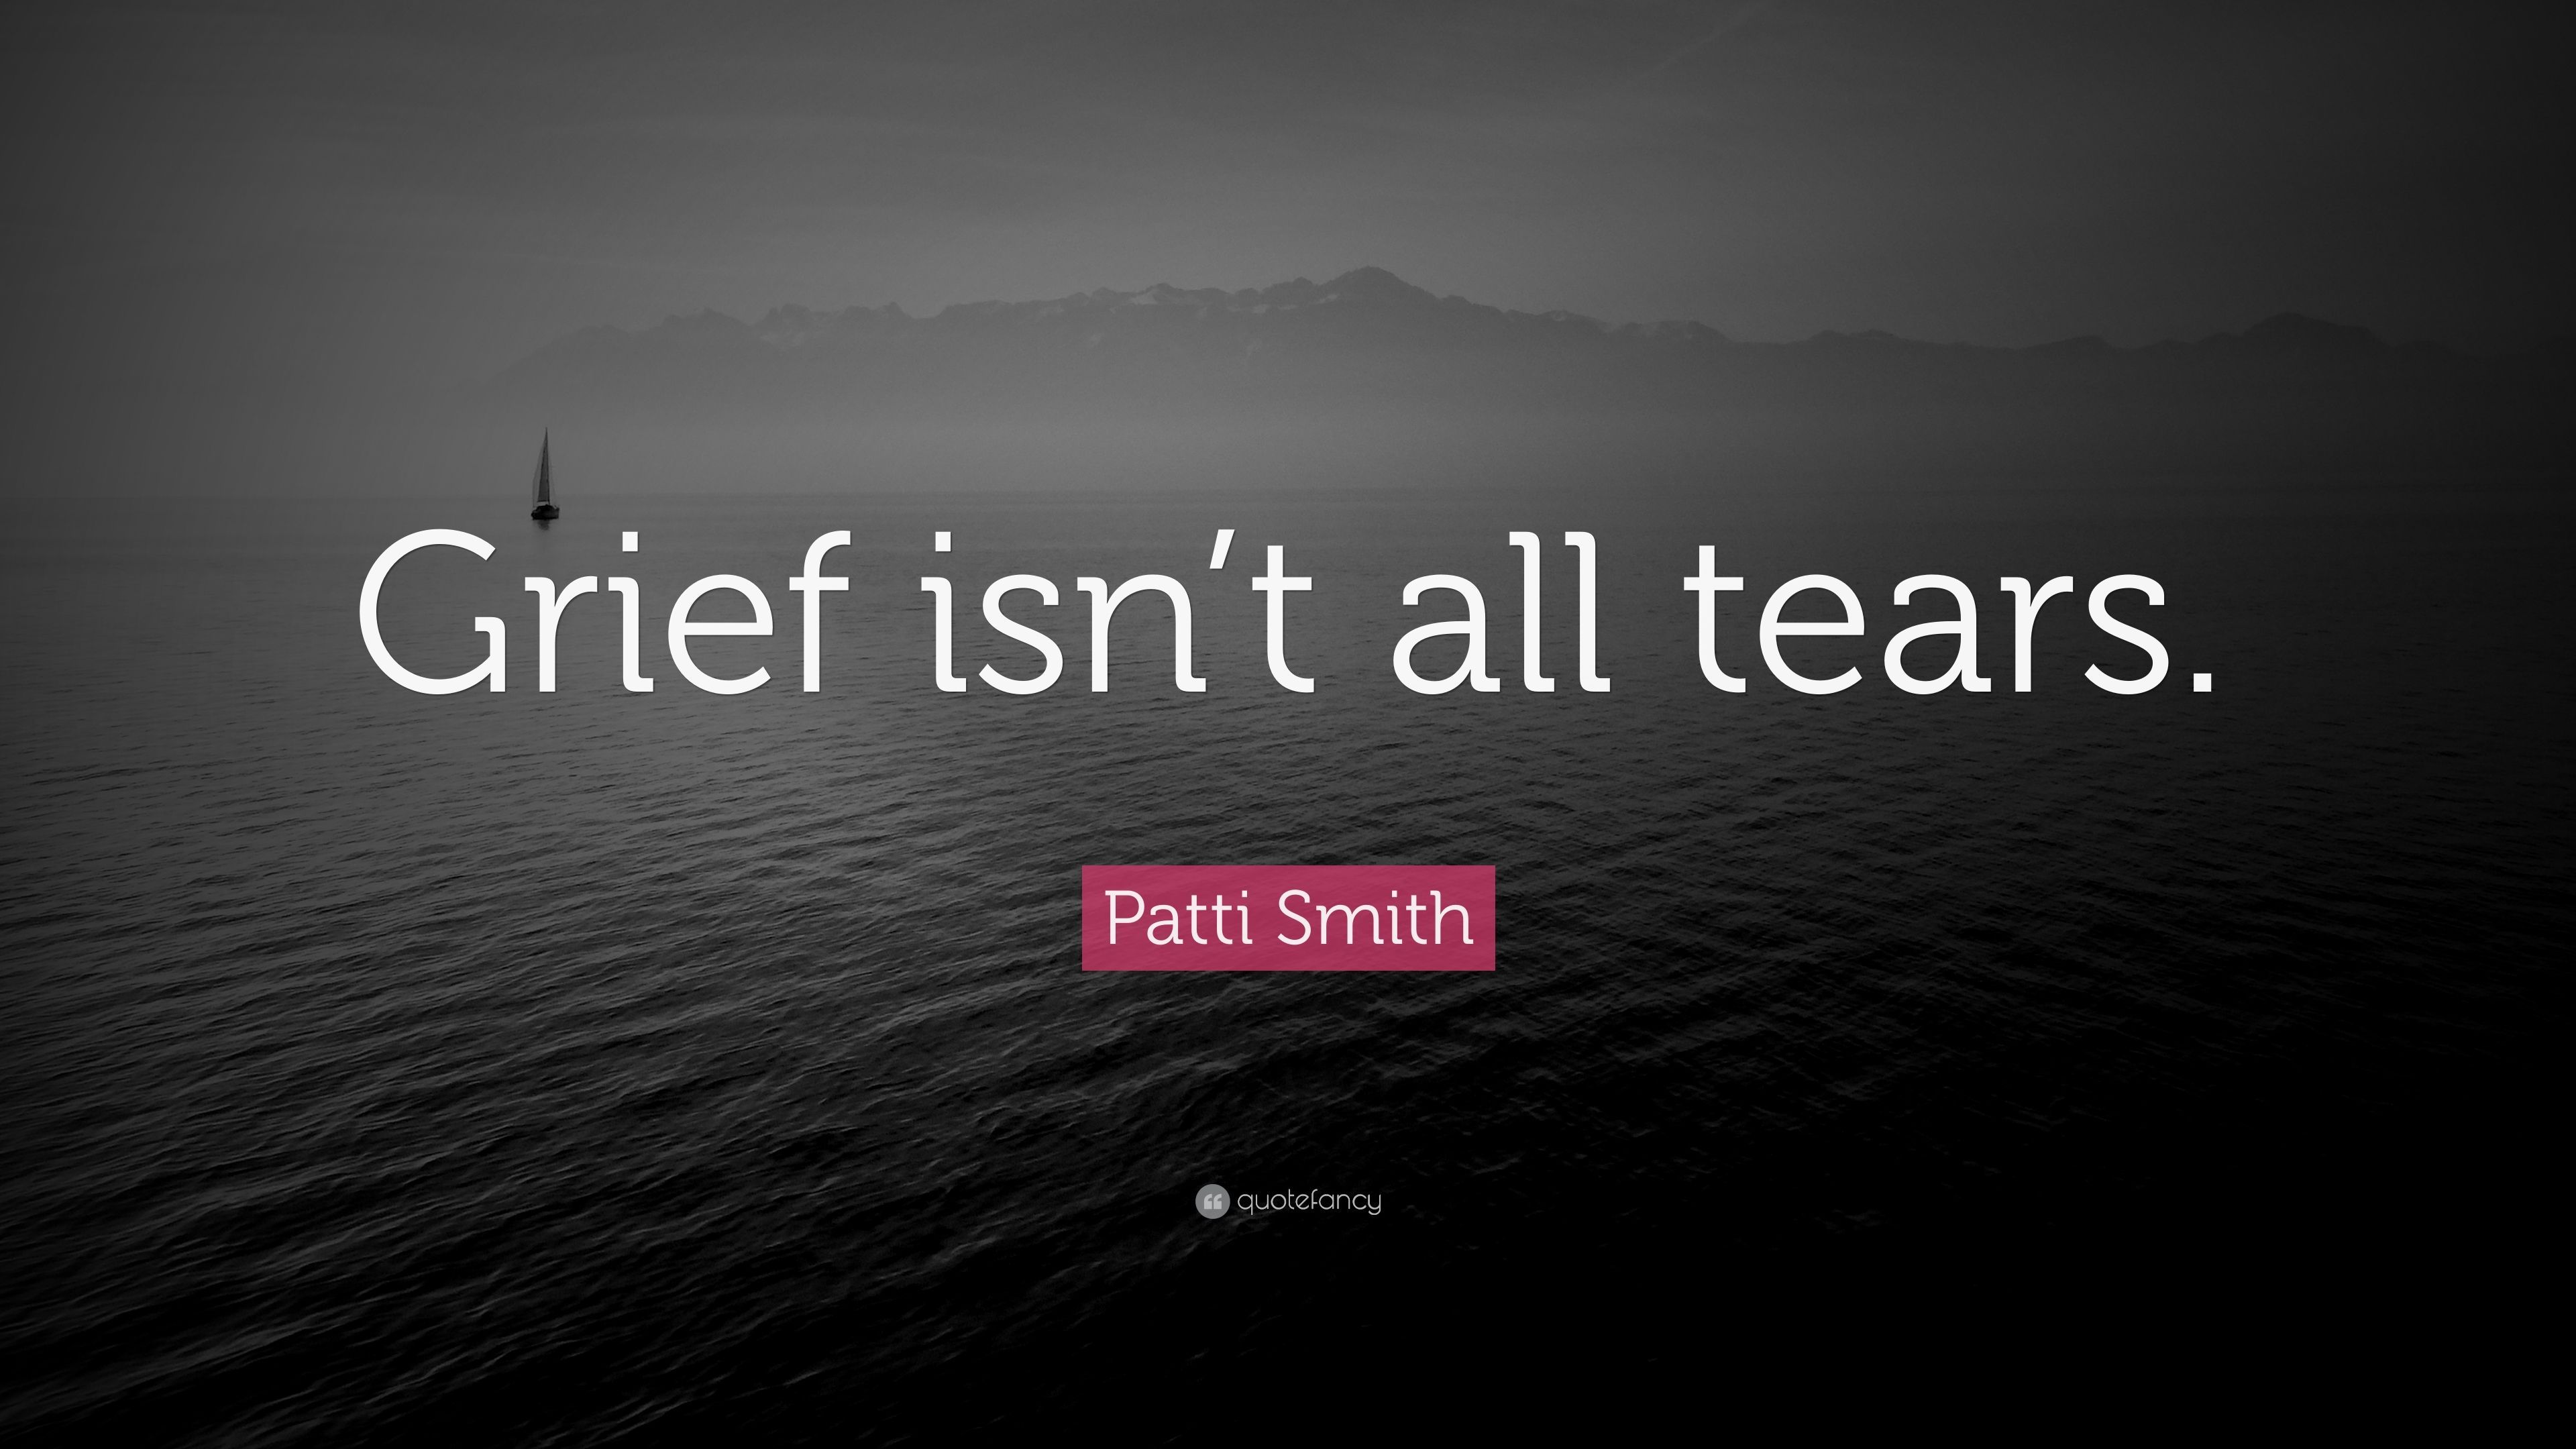 Patti Smith Quote: “Grief isn't all tears.” 6 wallpaper